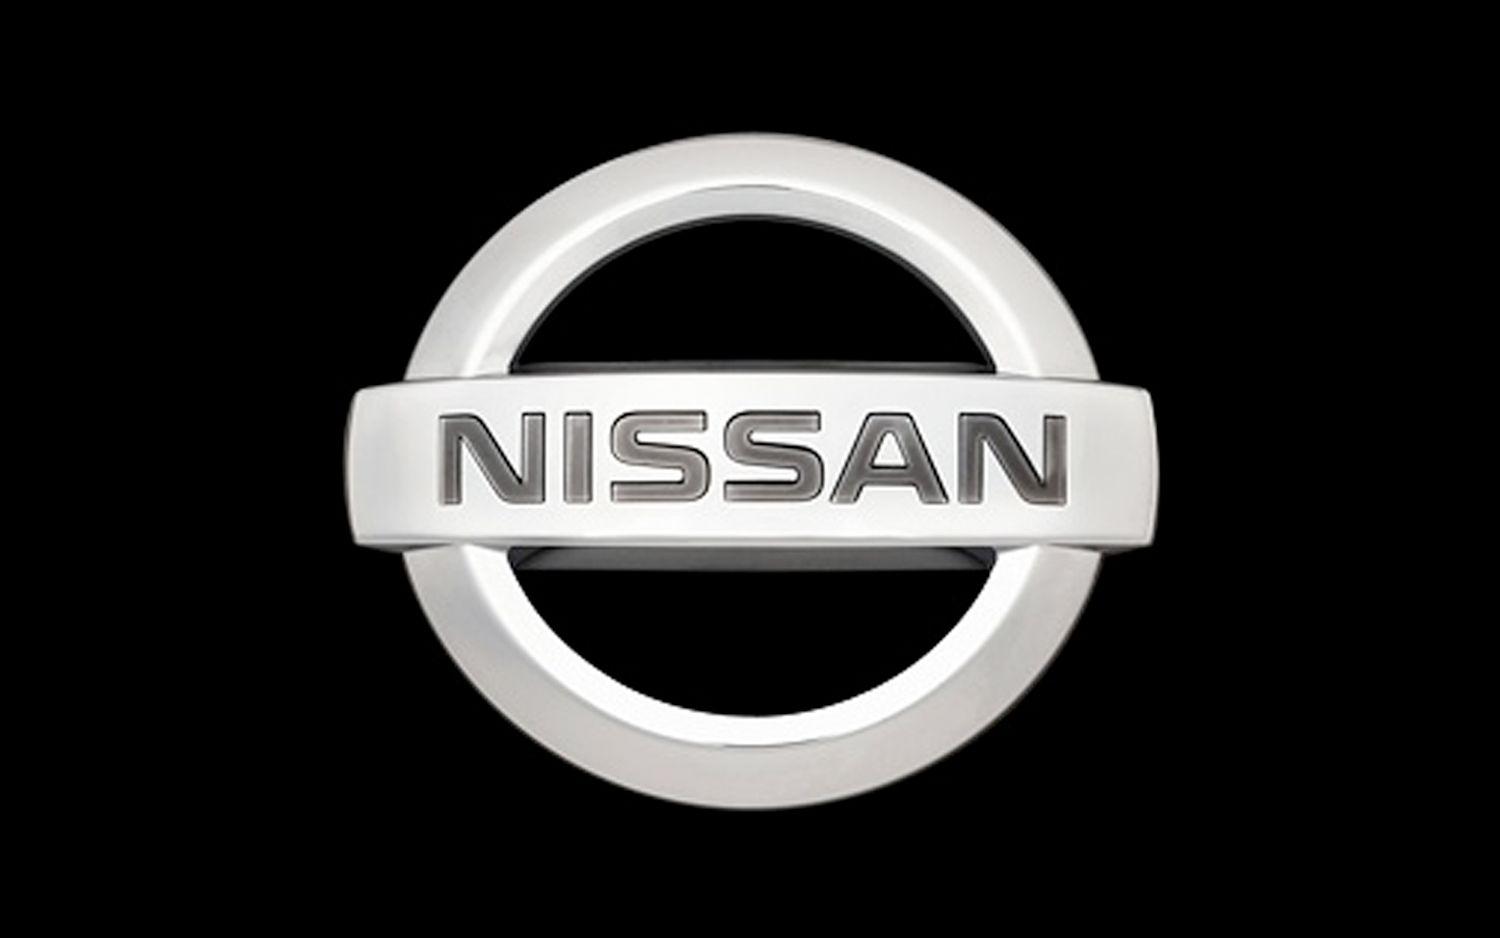 Black and White Automotive Logo - Nissan Logo, Nissan Car Symbol Meaning and History. Car Brand Names.com